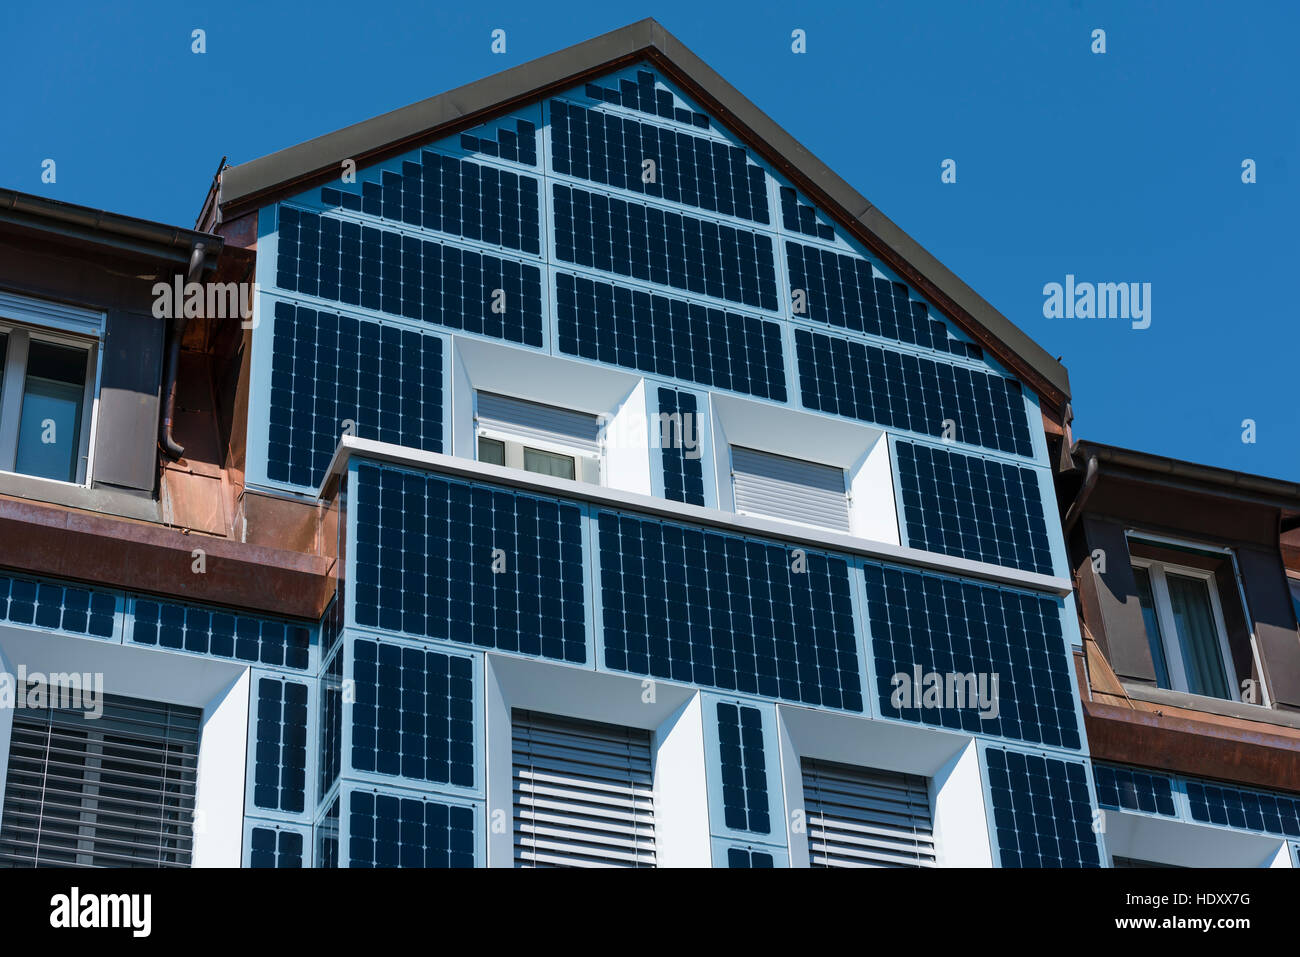 Facade of a residential house in Zurich, Switzerland, completely covered with solar cells. Stock Photo